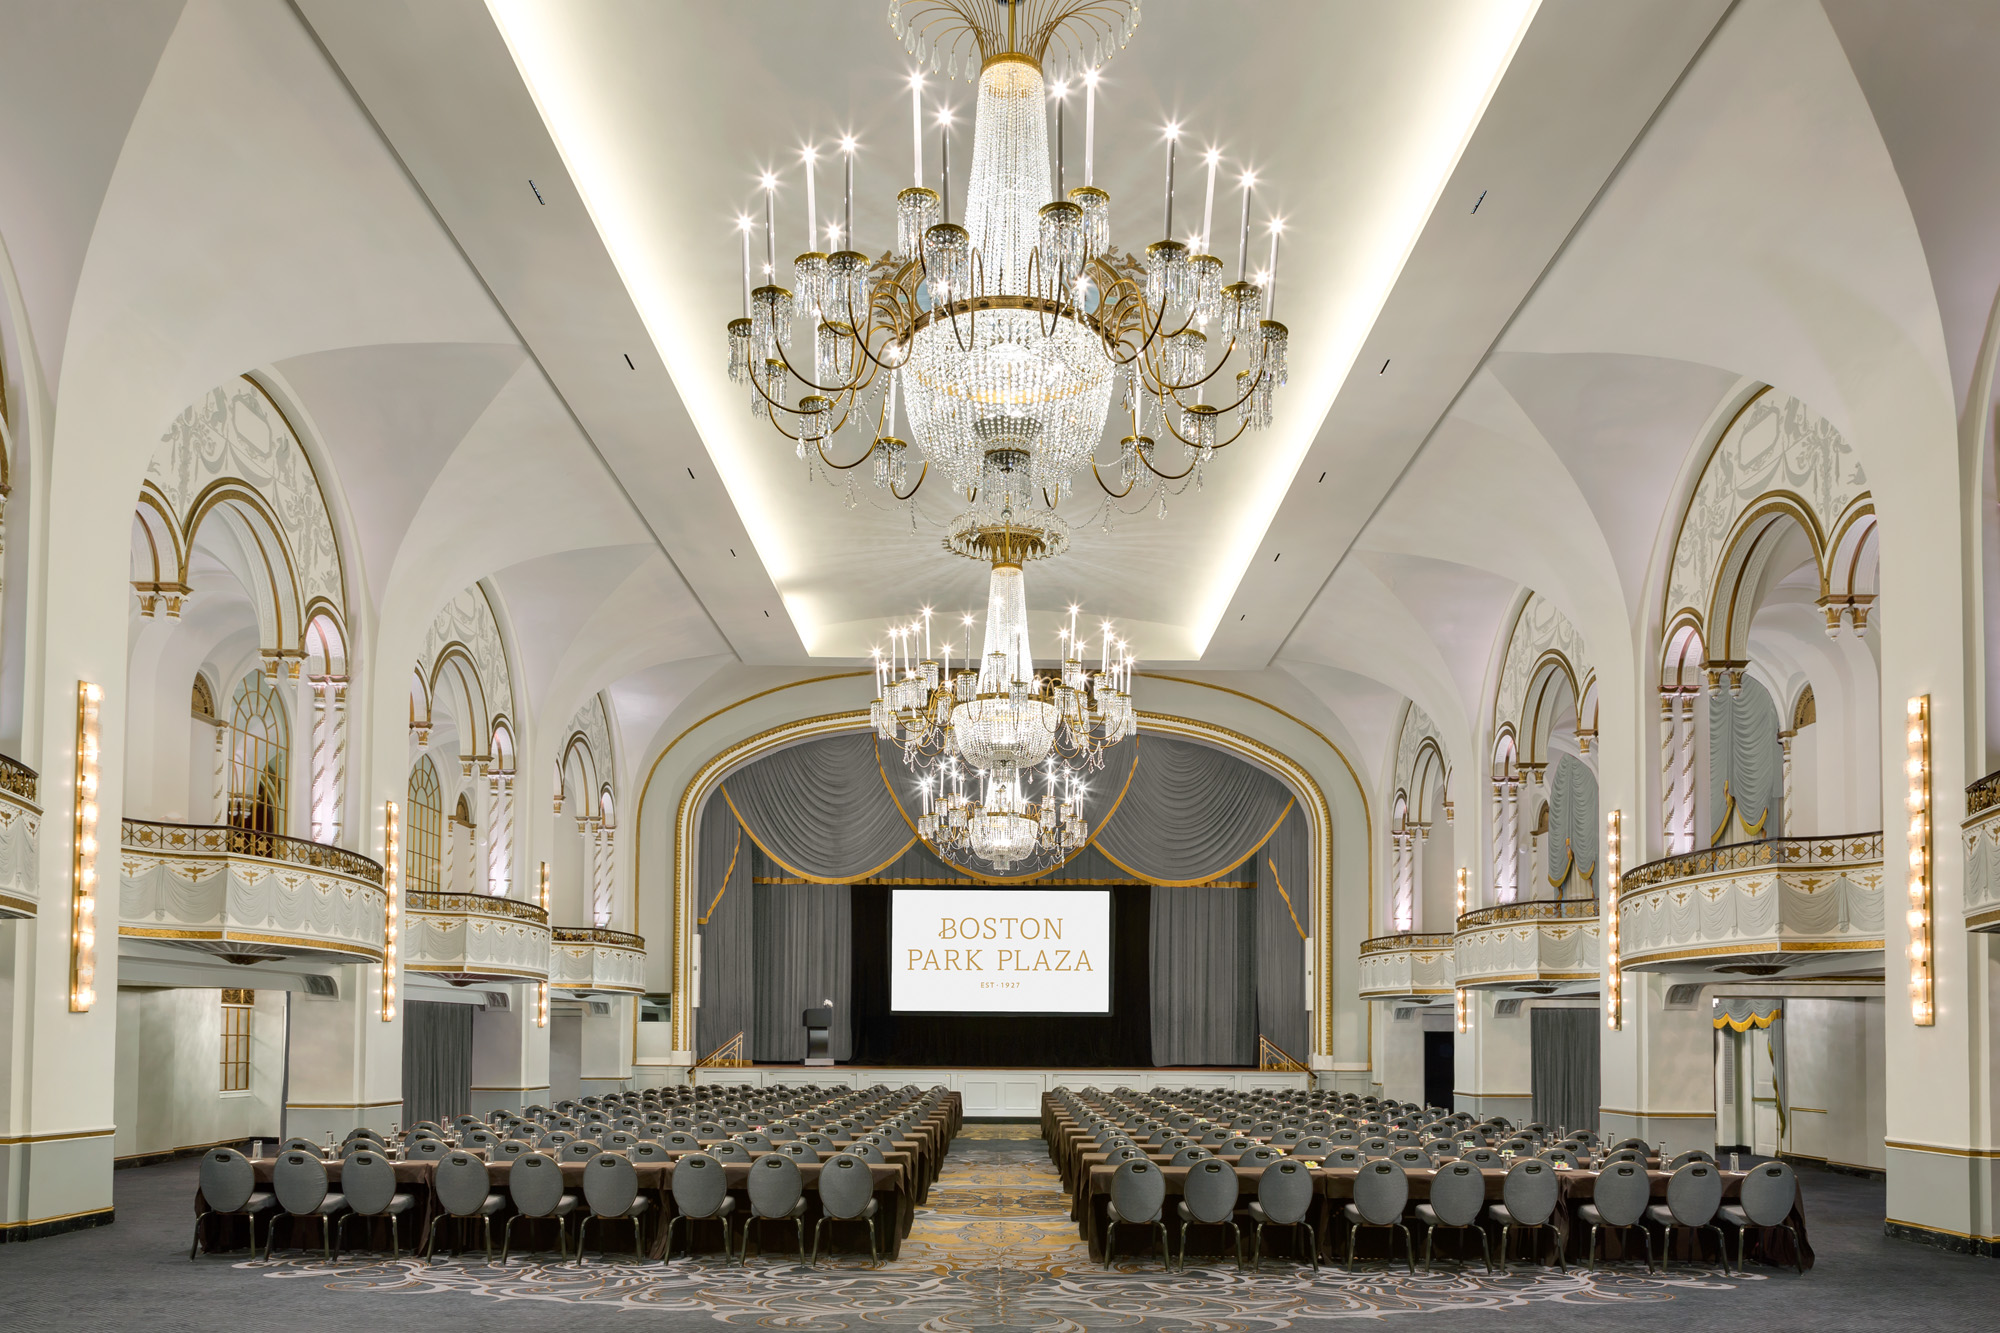 Boston Park Plaza Ballroom, with audience seating, balconies, and chandeliers.